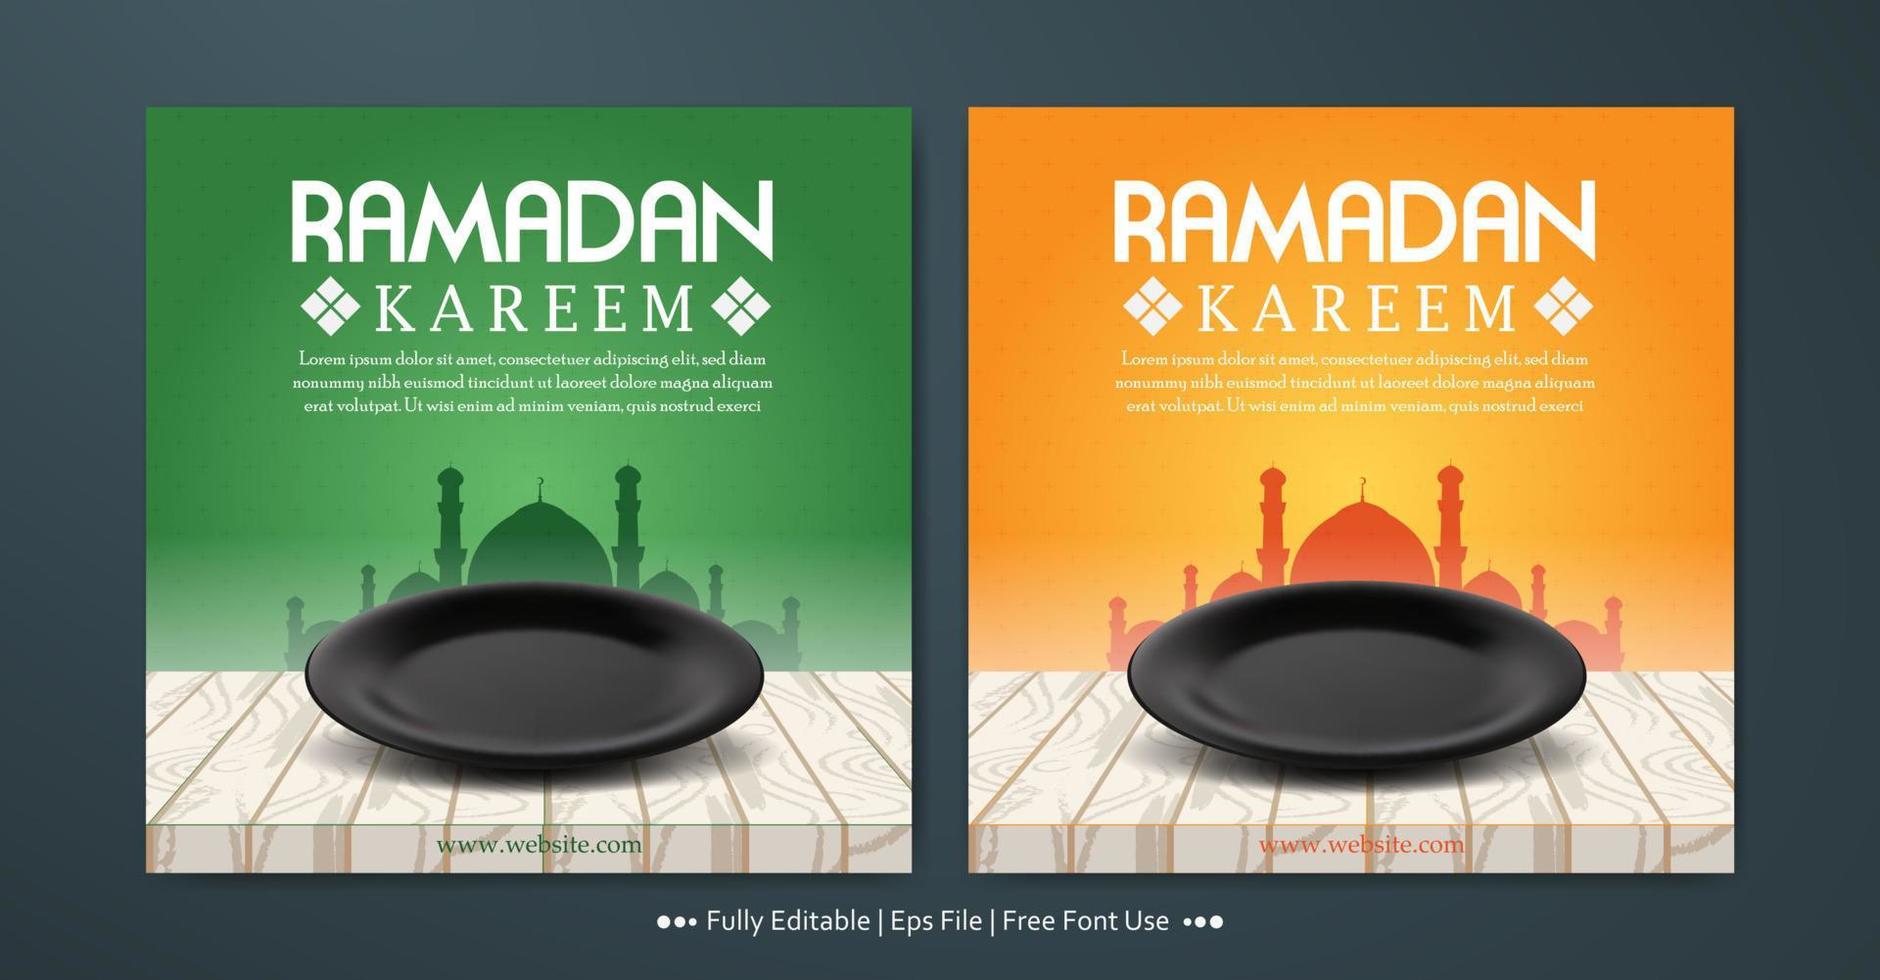 Ramadan kareem with empty plate square banner template collection vector